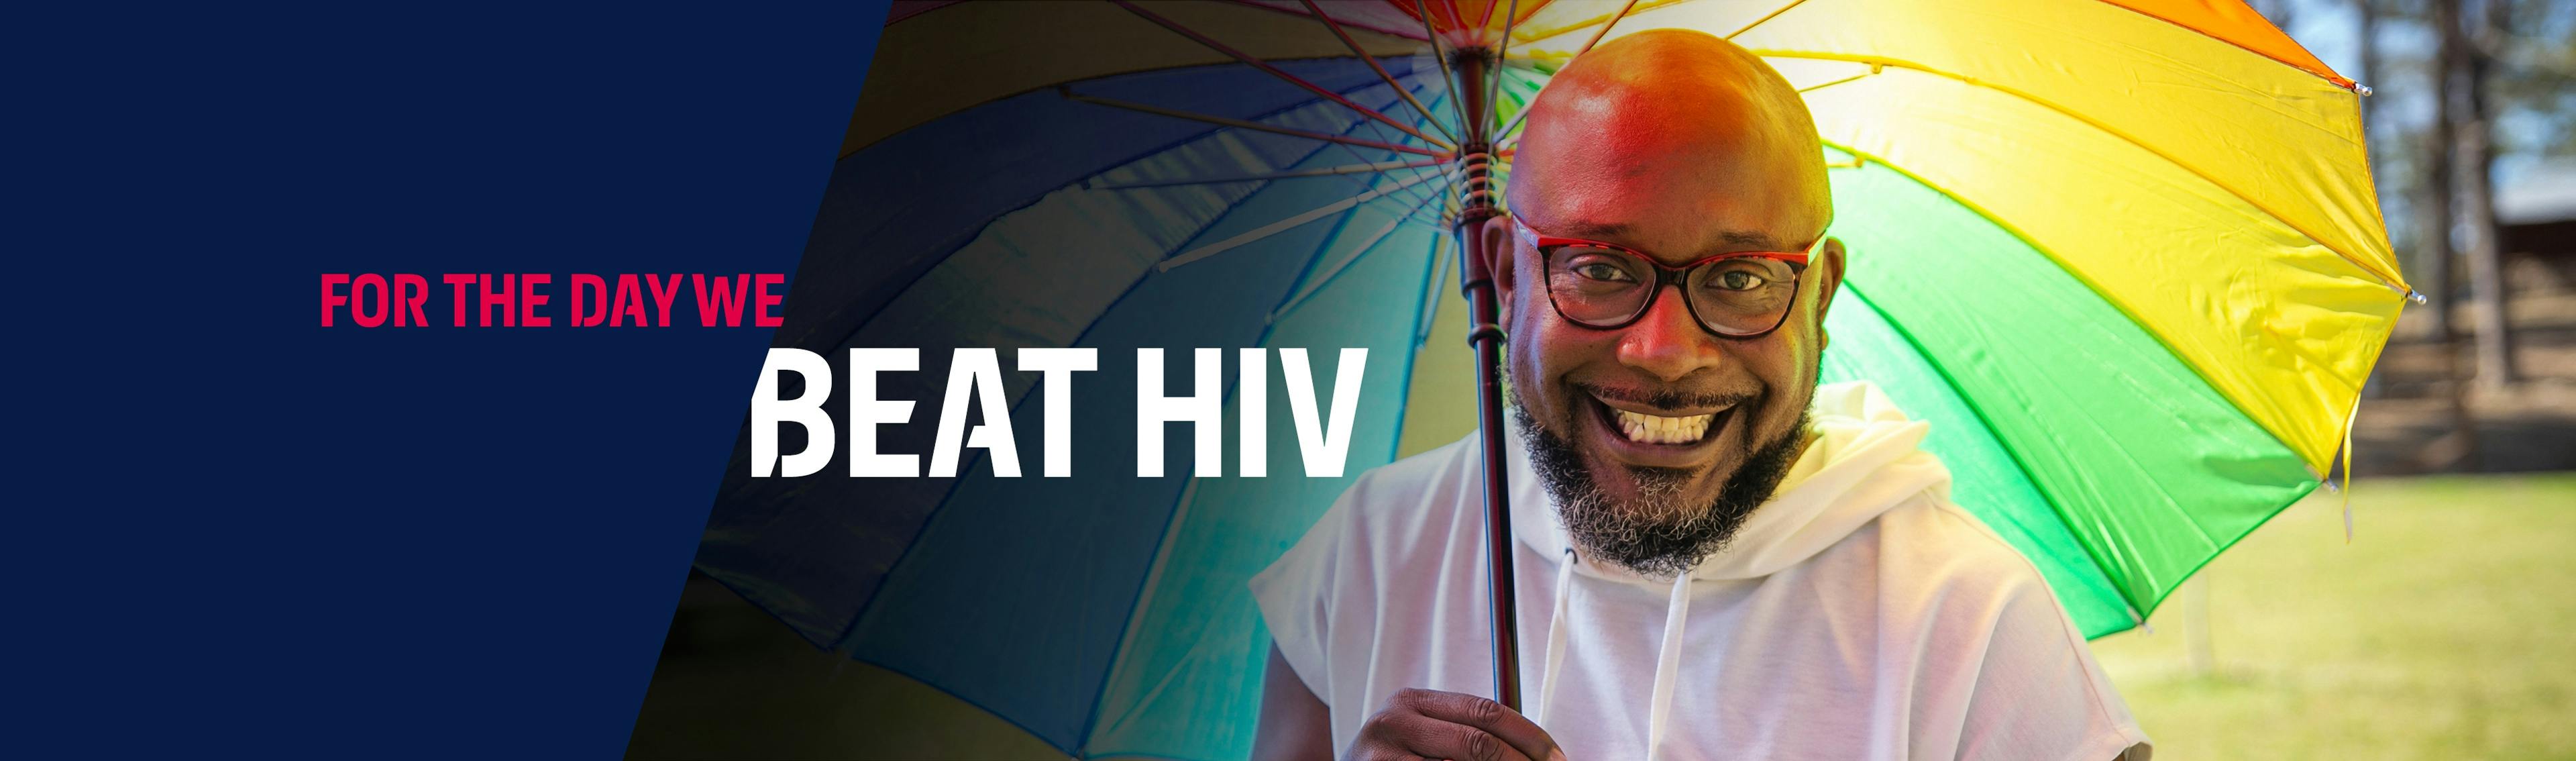 Black man living with HIV in USA holding a rainbow umbrella